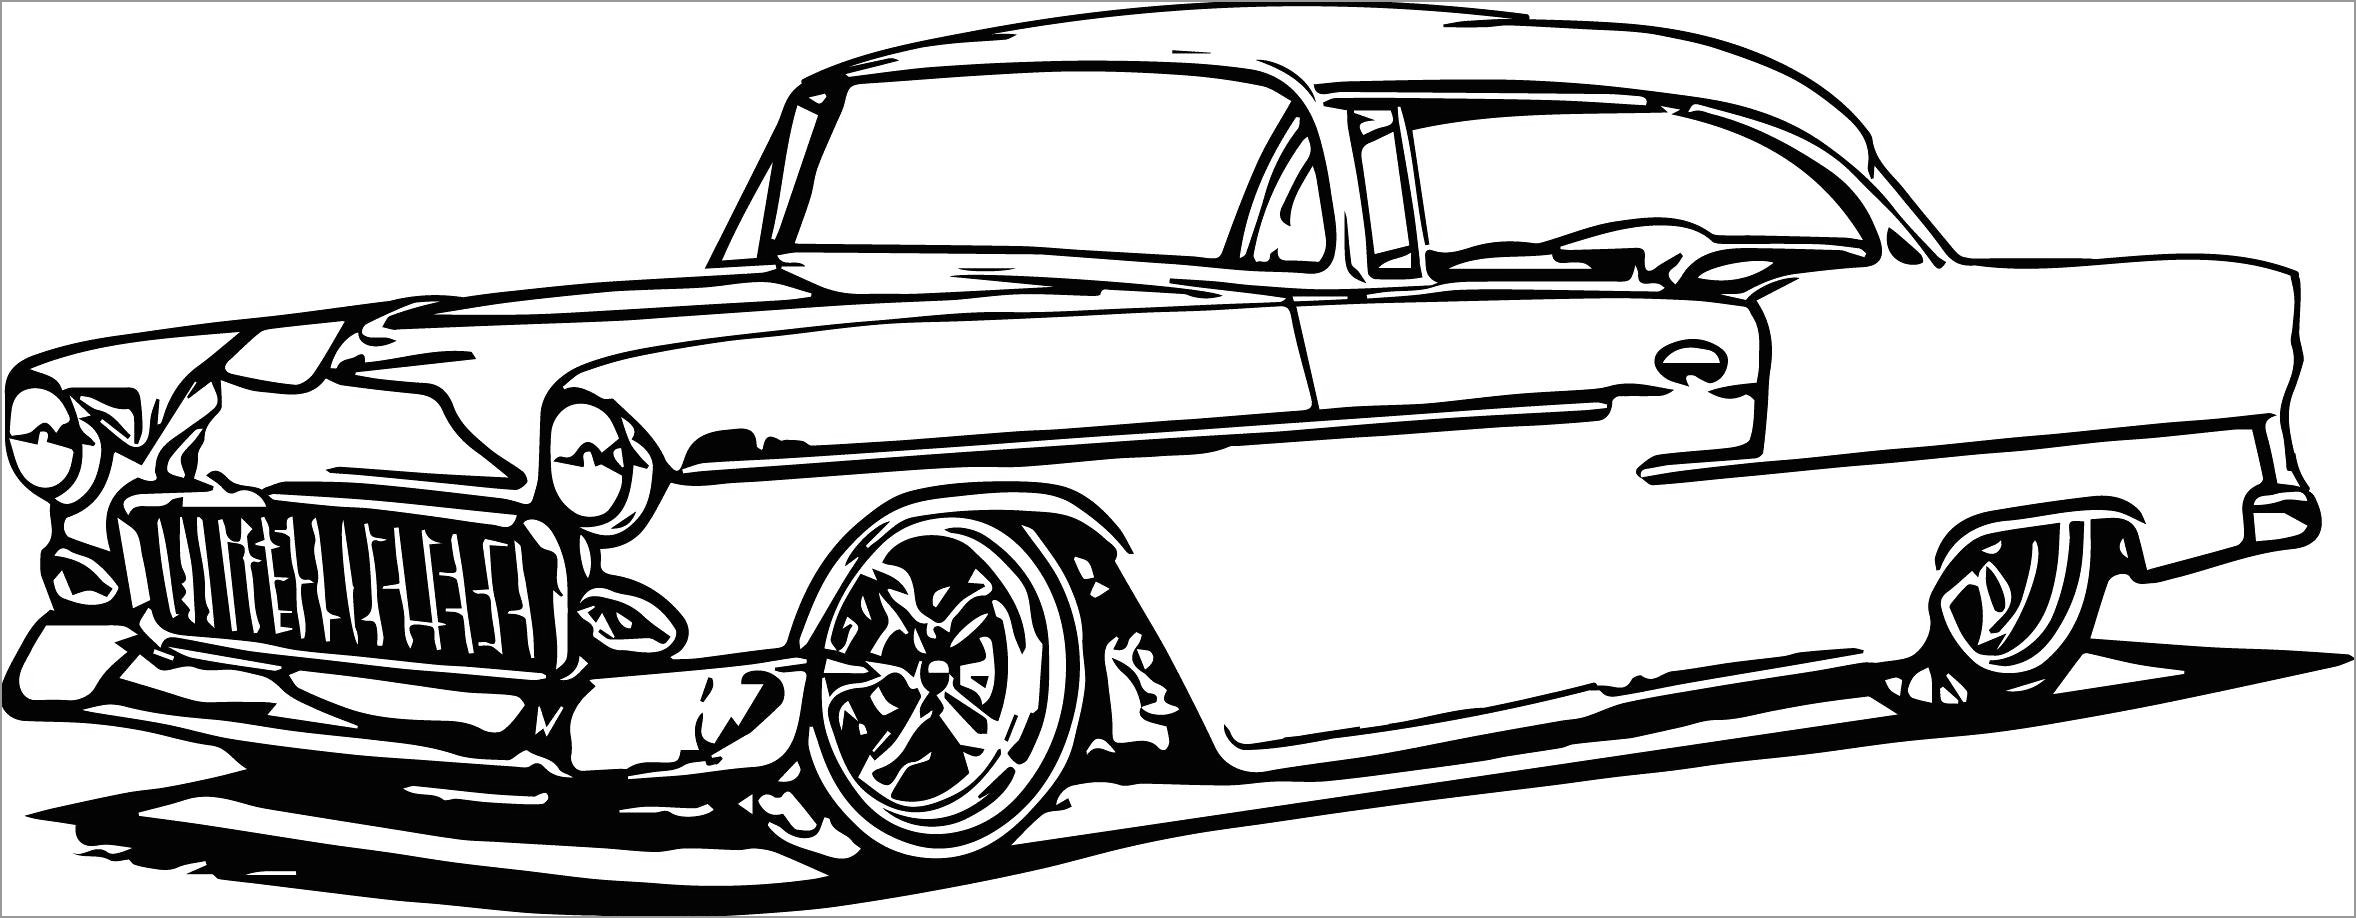 classic cars coloring pages coloringbay